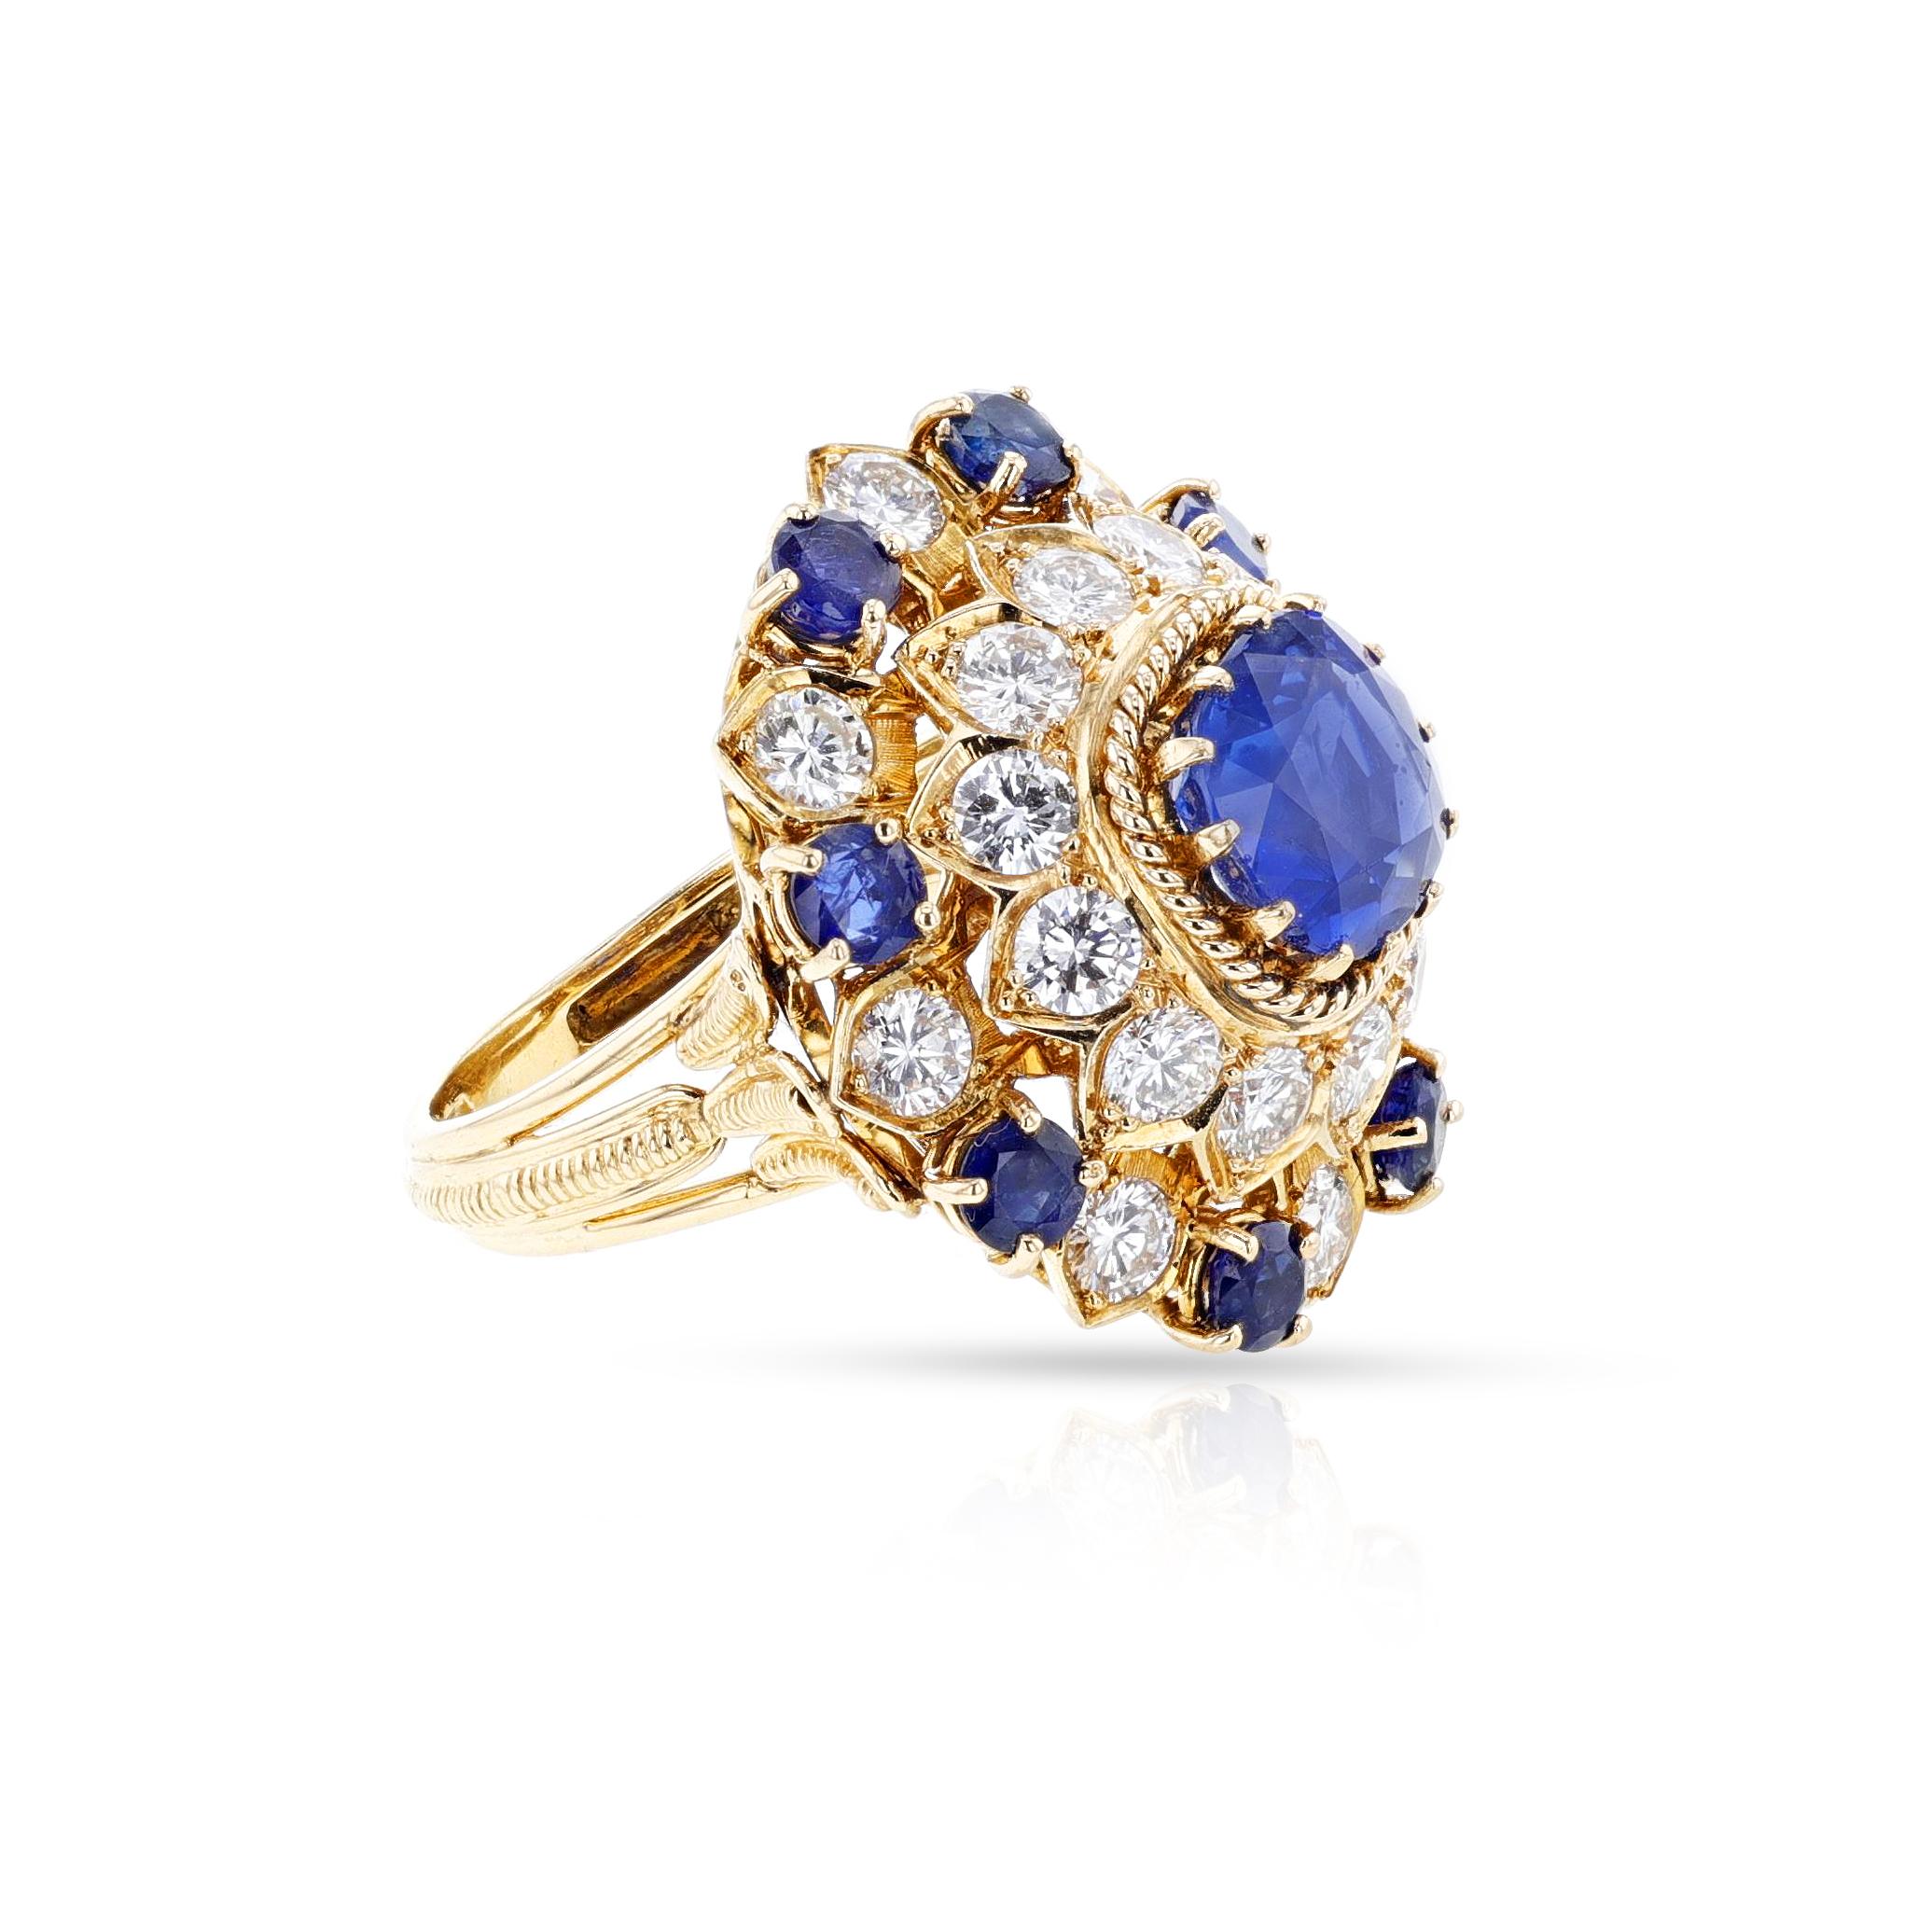 Vourakis Sapphire and Diamond Earrings, Brooch, and Ring Suite 18k For Sale 4